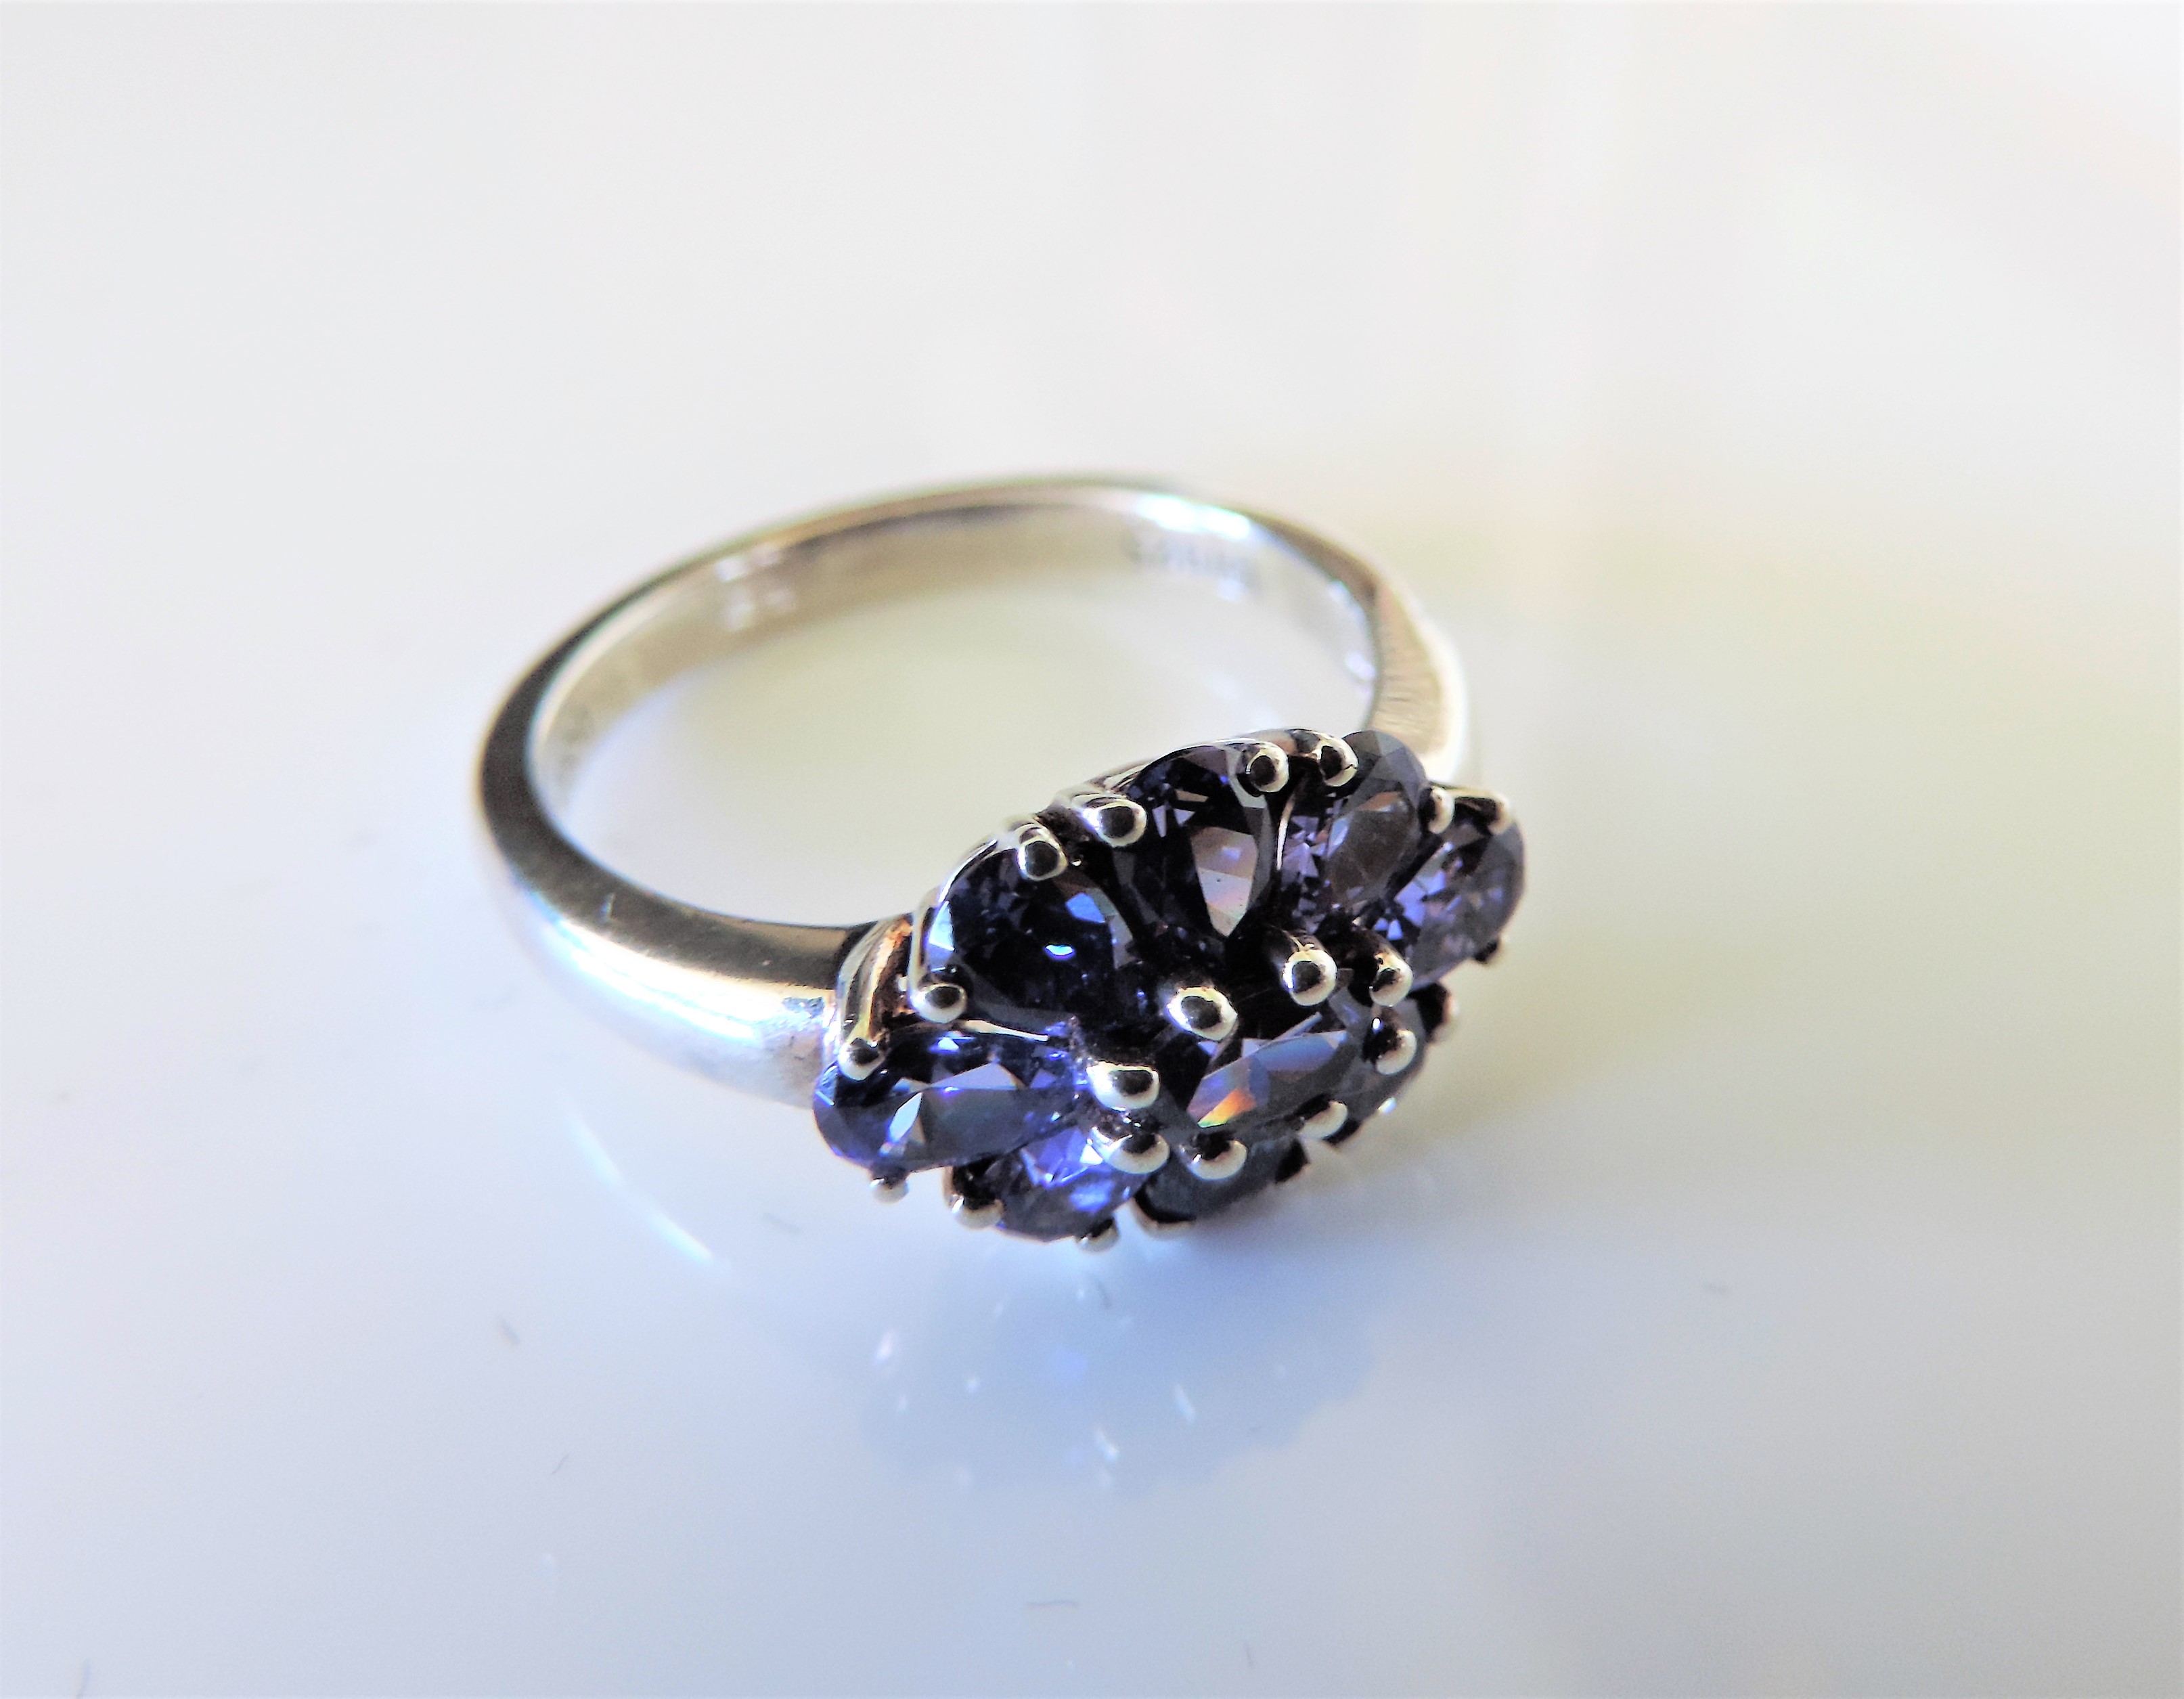 1.8 ct Tanzanite Cluster Ring in Sterling Silver - Image 3 of 4